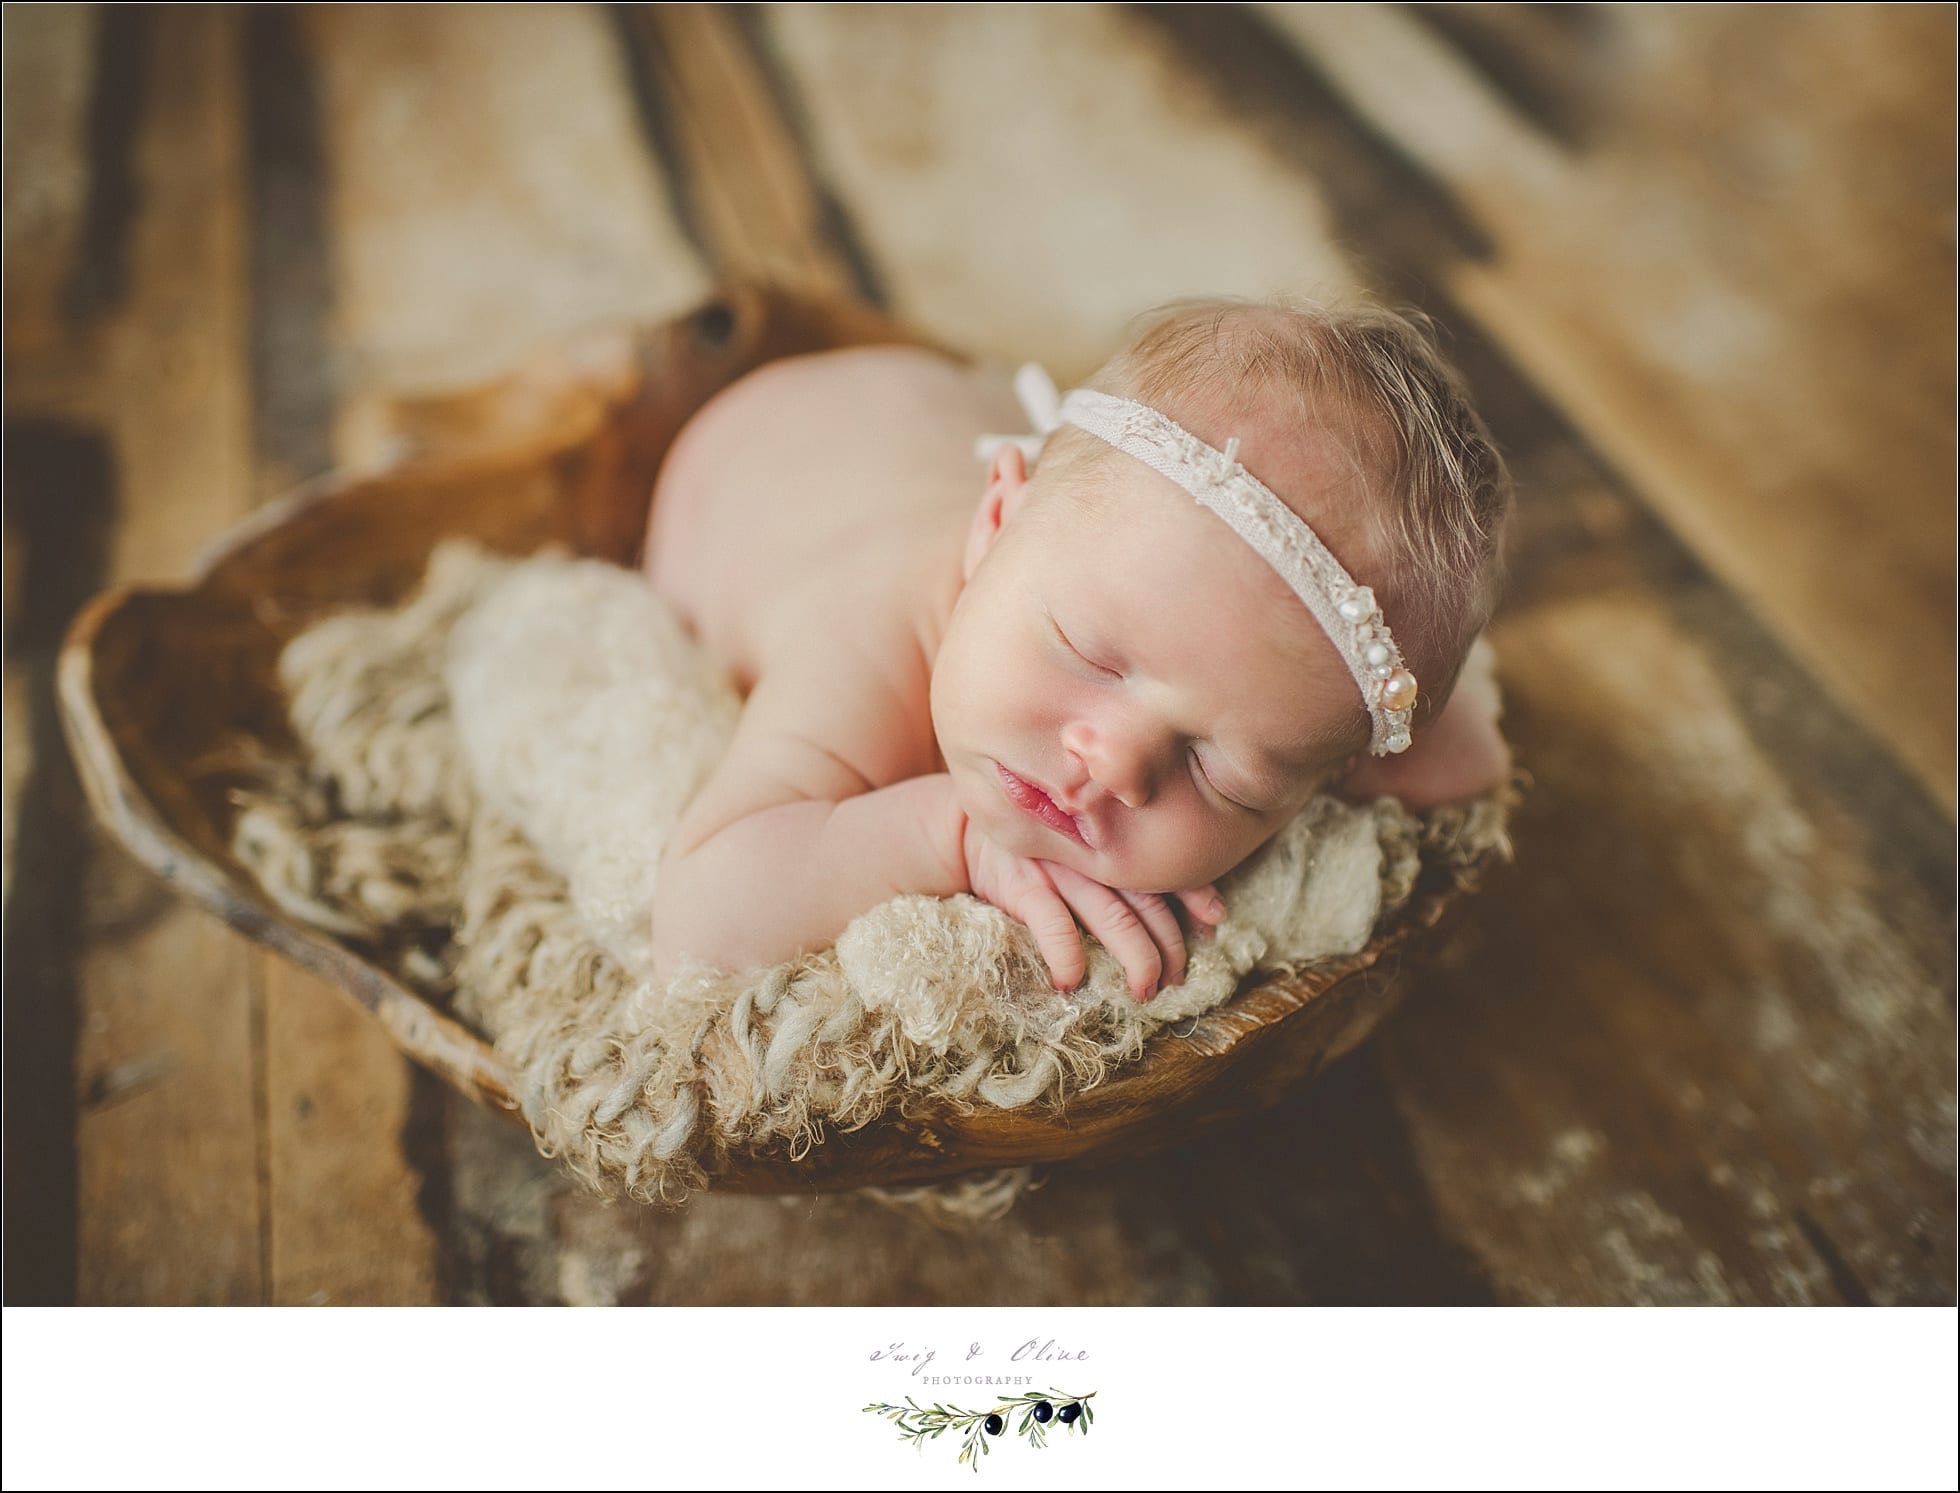 babies, newborns, Twig and Olive photography newborn sessions, head bands, rustic, woodsy, wraps, blankets, TOP